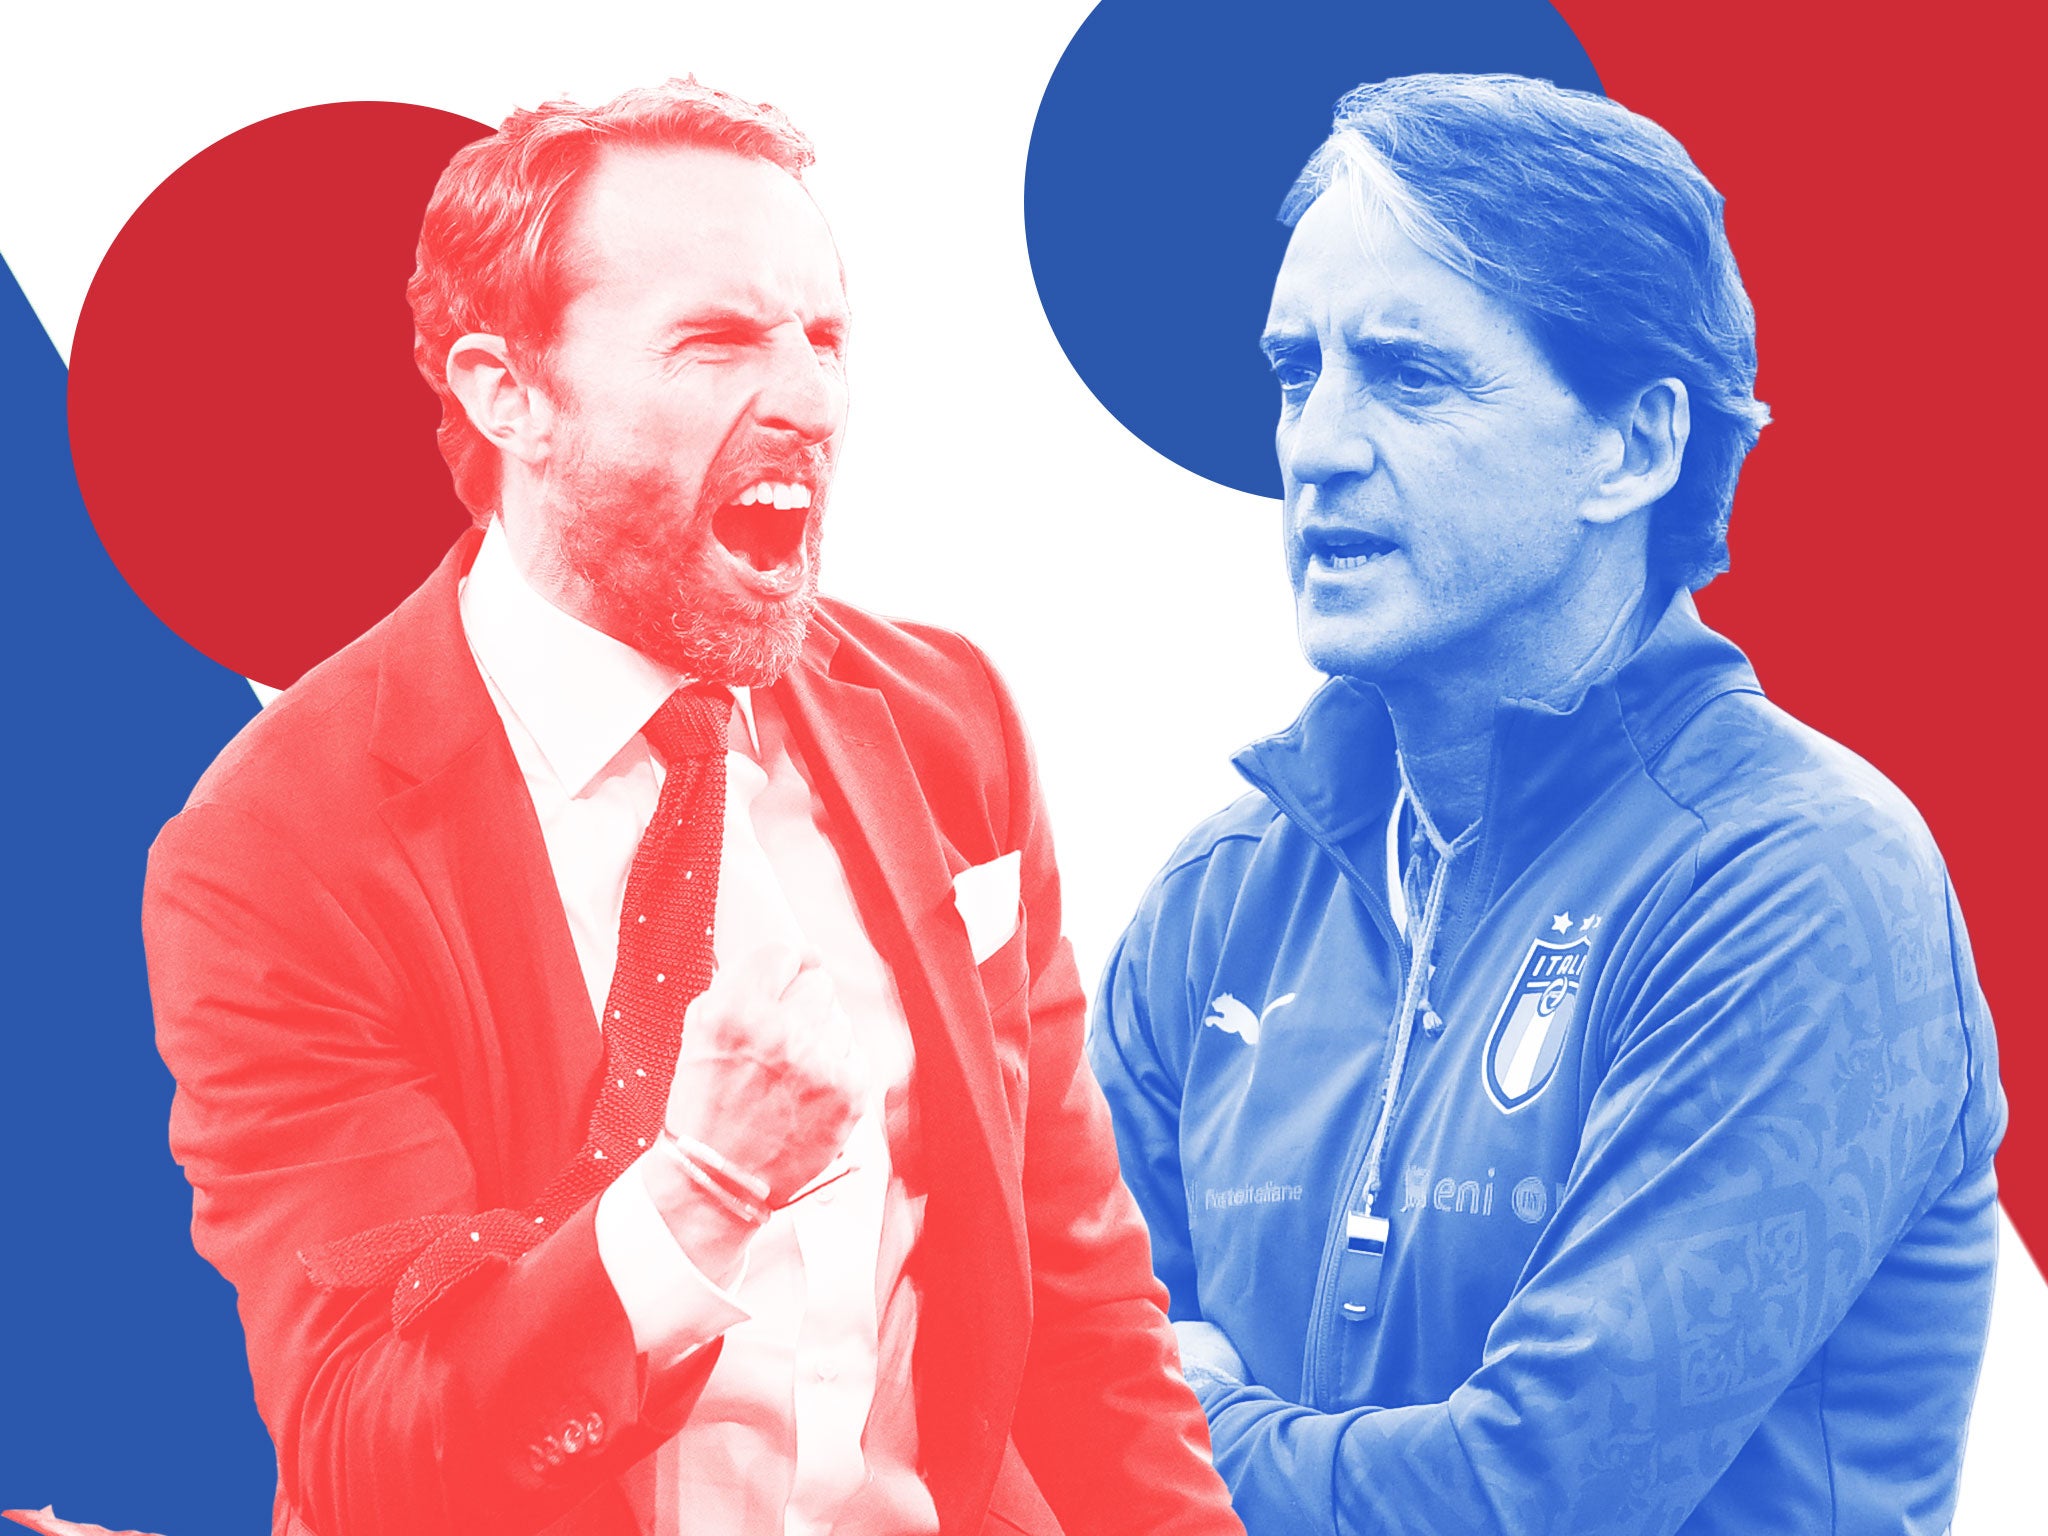 Gareth Southgate and Roberto Mancini will face each other at Wembley on Sunday